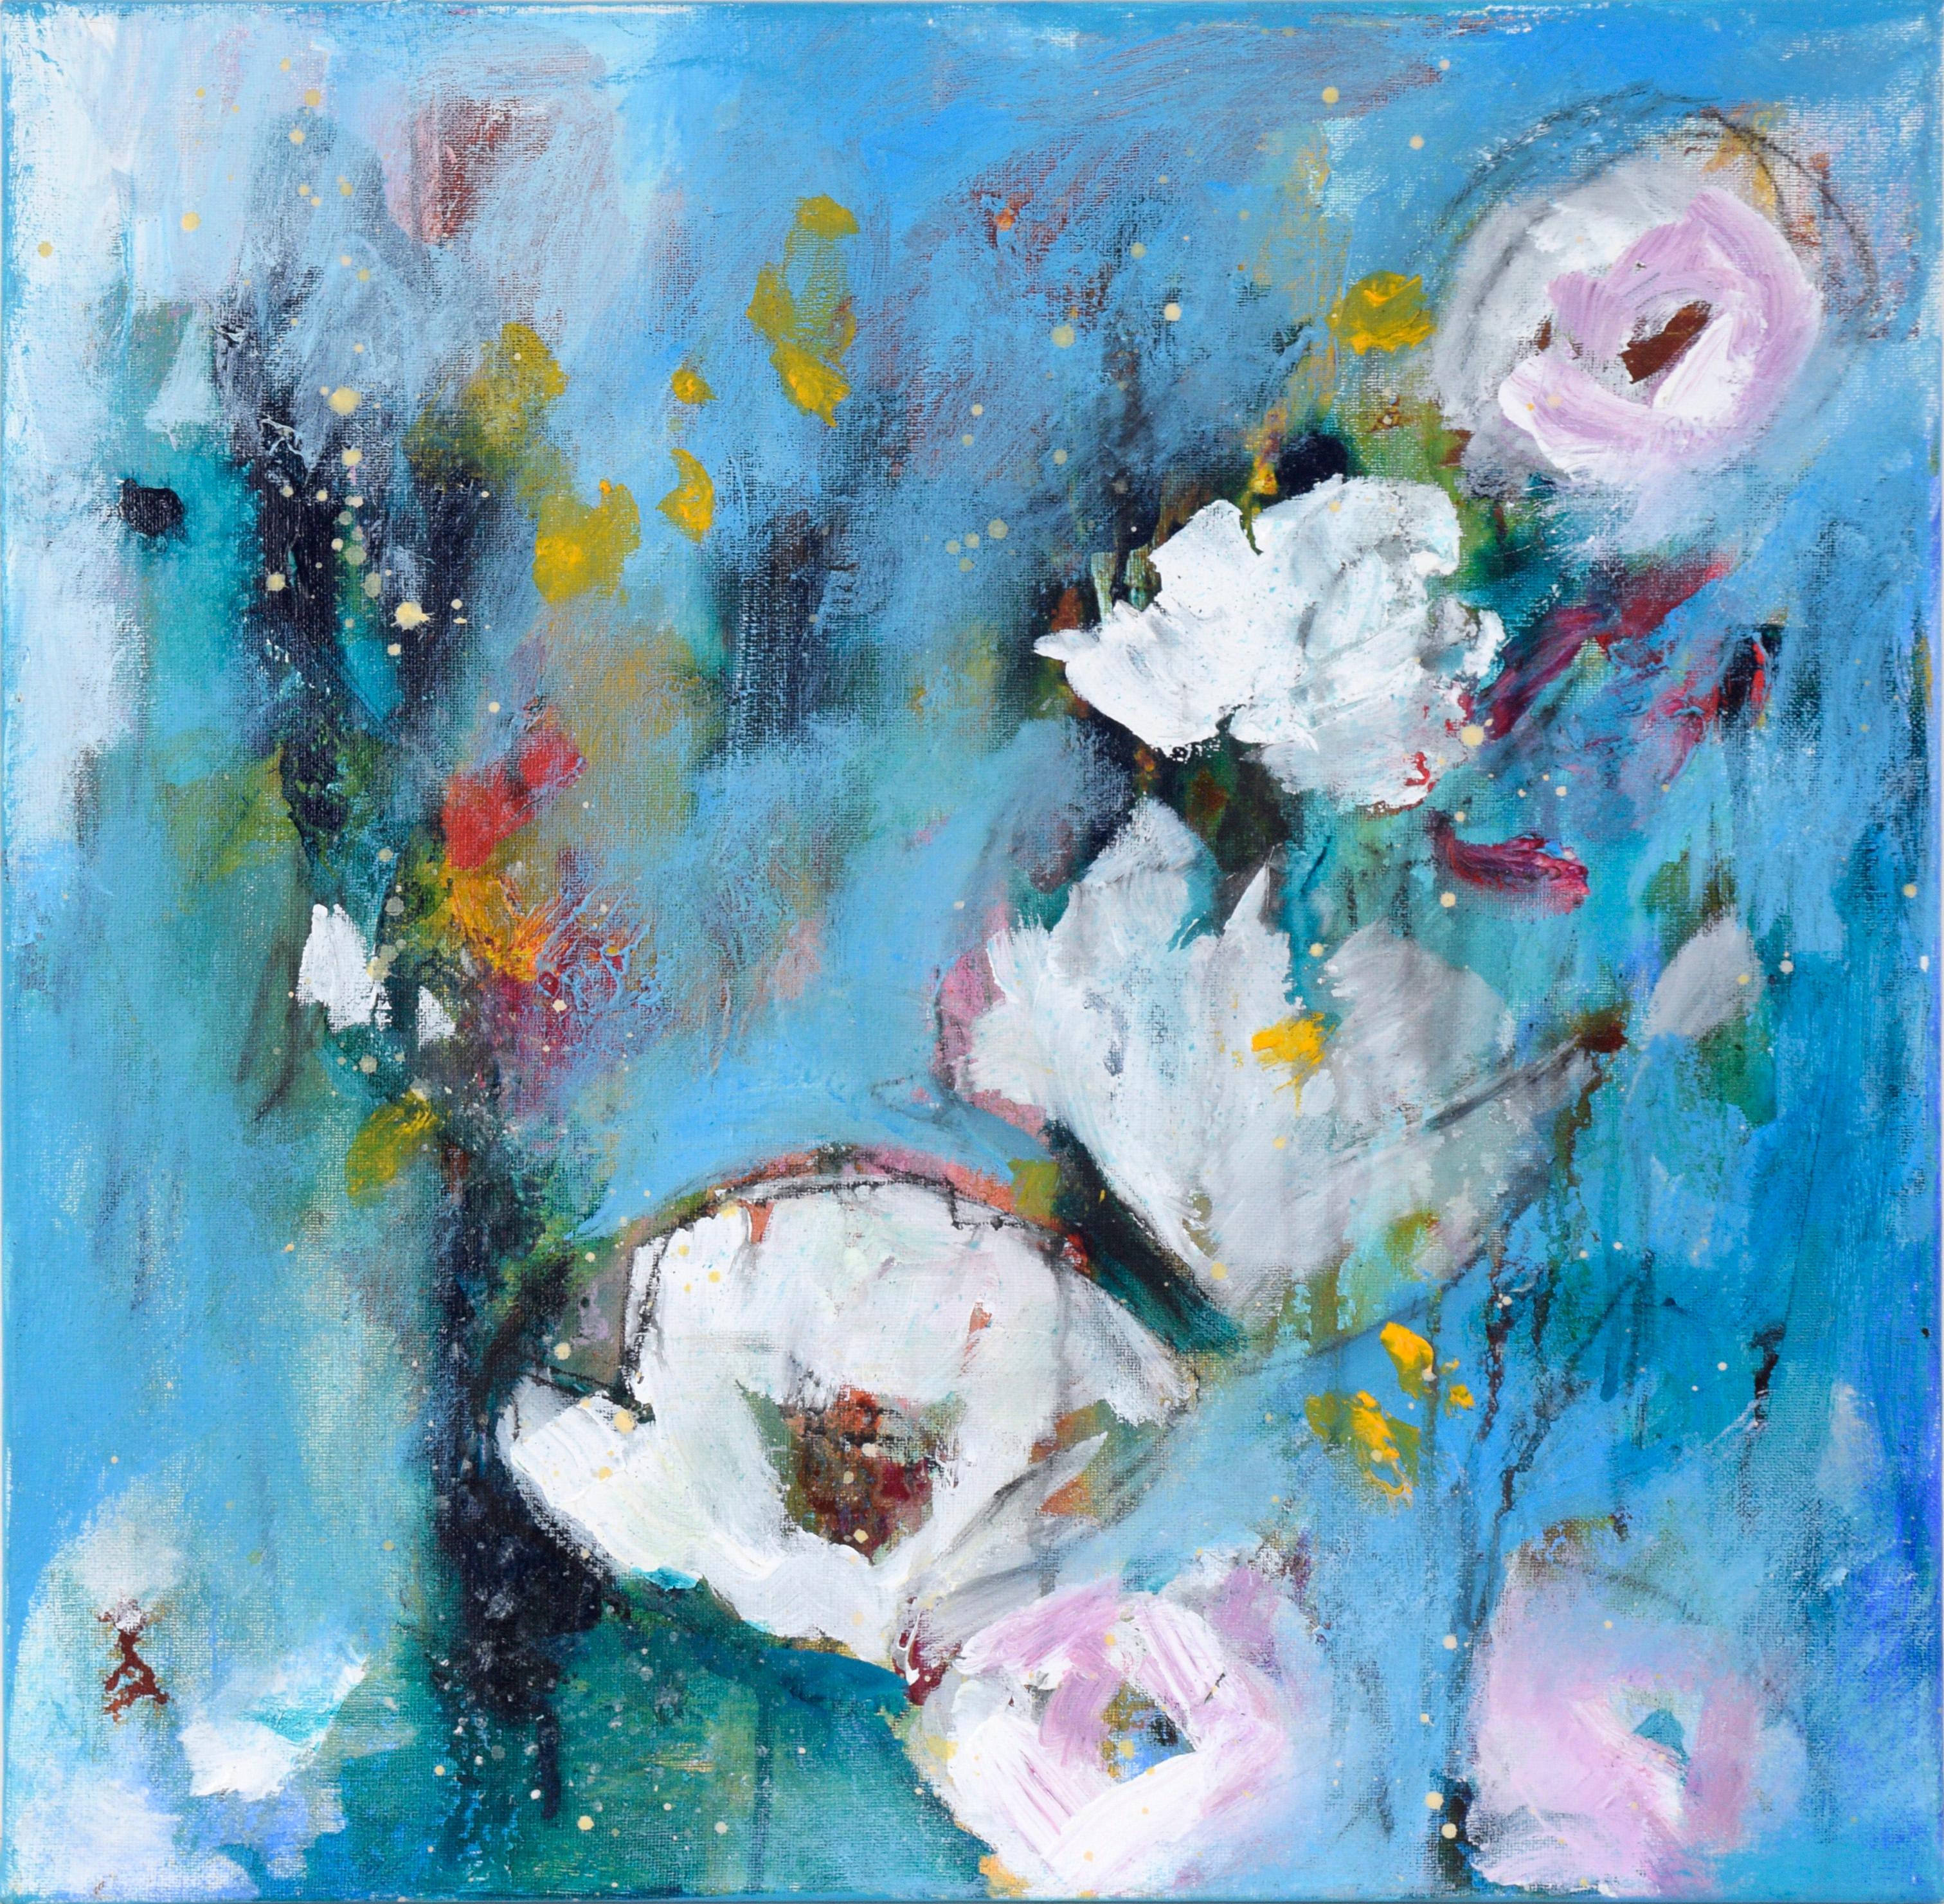 Ilana Ingber Abstract Painting - Abstract Expressionist Still Life with White Flowers